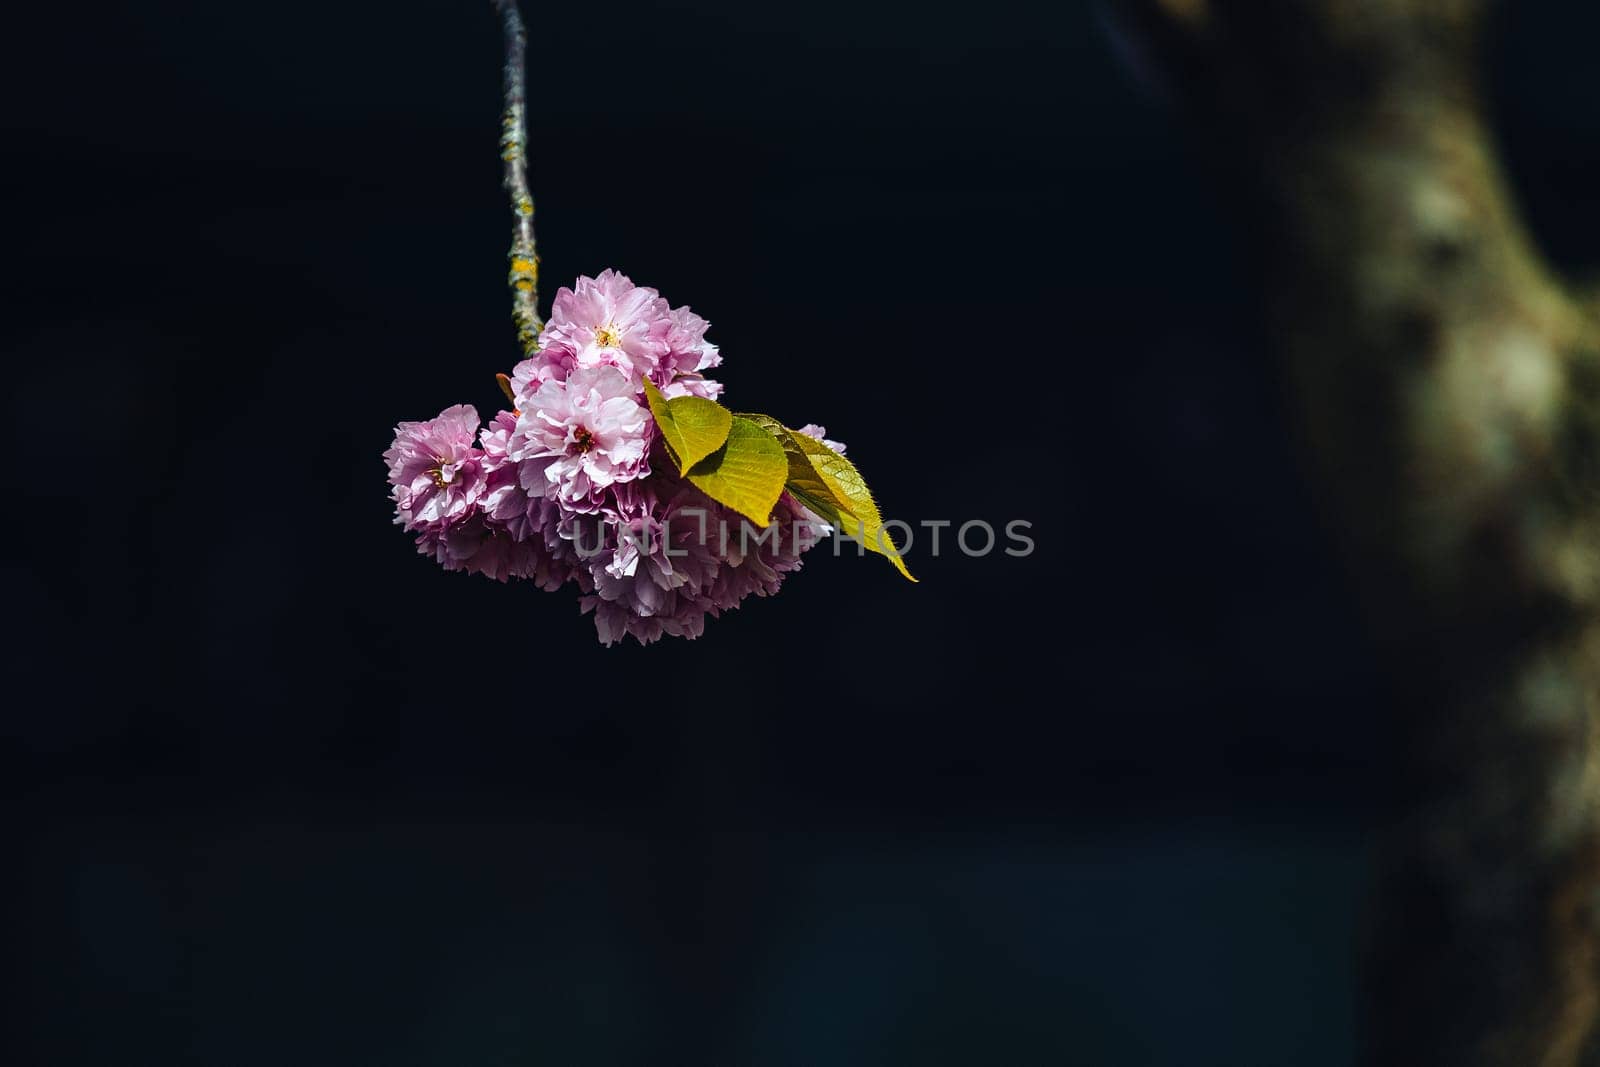 A single pink flower is hanging from a branch. The flower is surrounded by a dark background, which creates a sense of solitude and tranquility